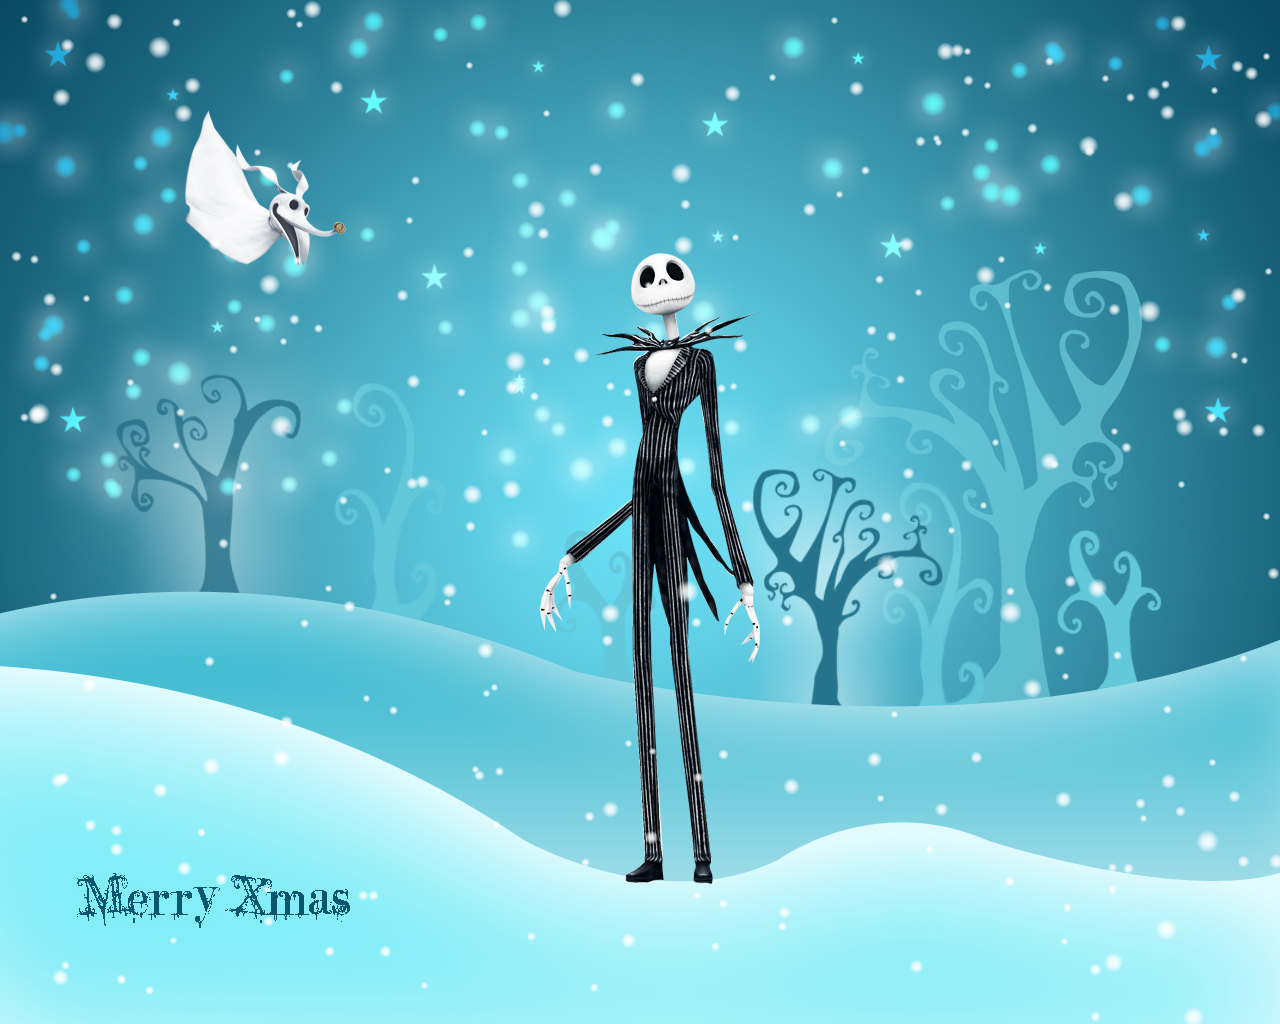 Jack Skellington wants to bring the joy of Christmastown back to his friends. 